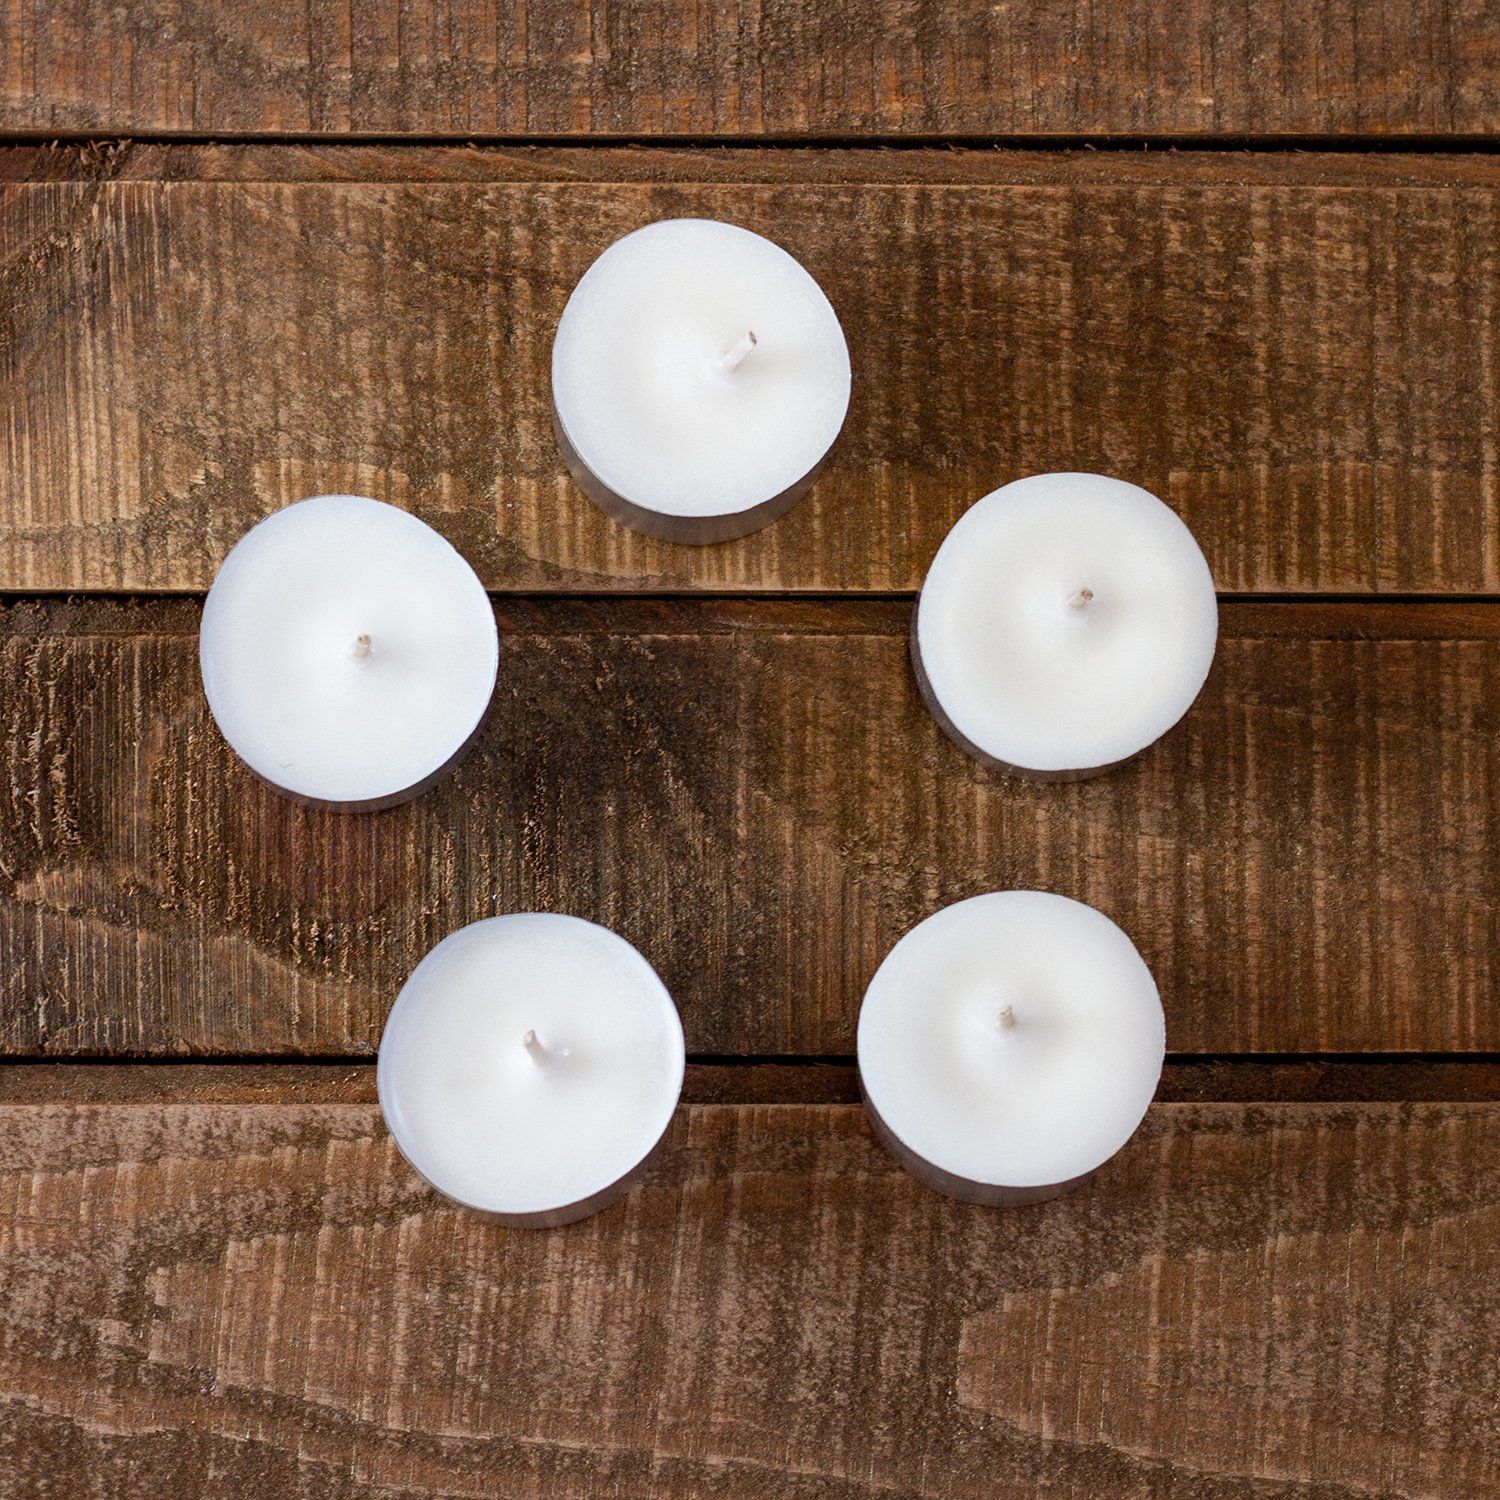 100% soy wax tealight candles